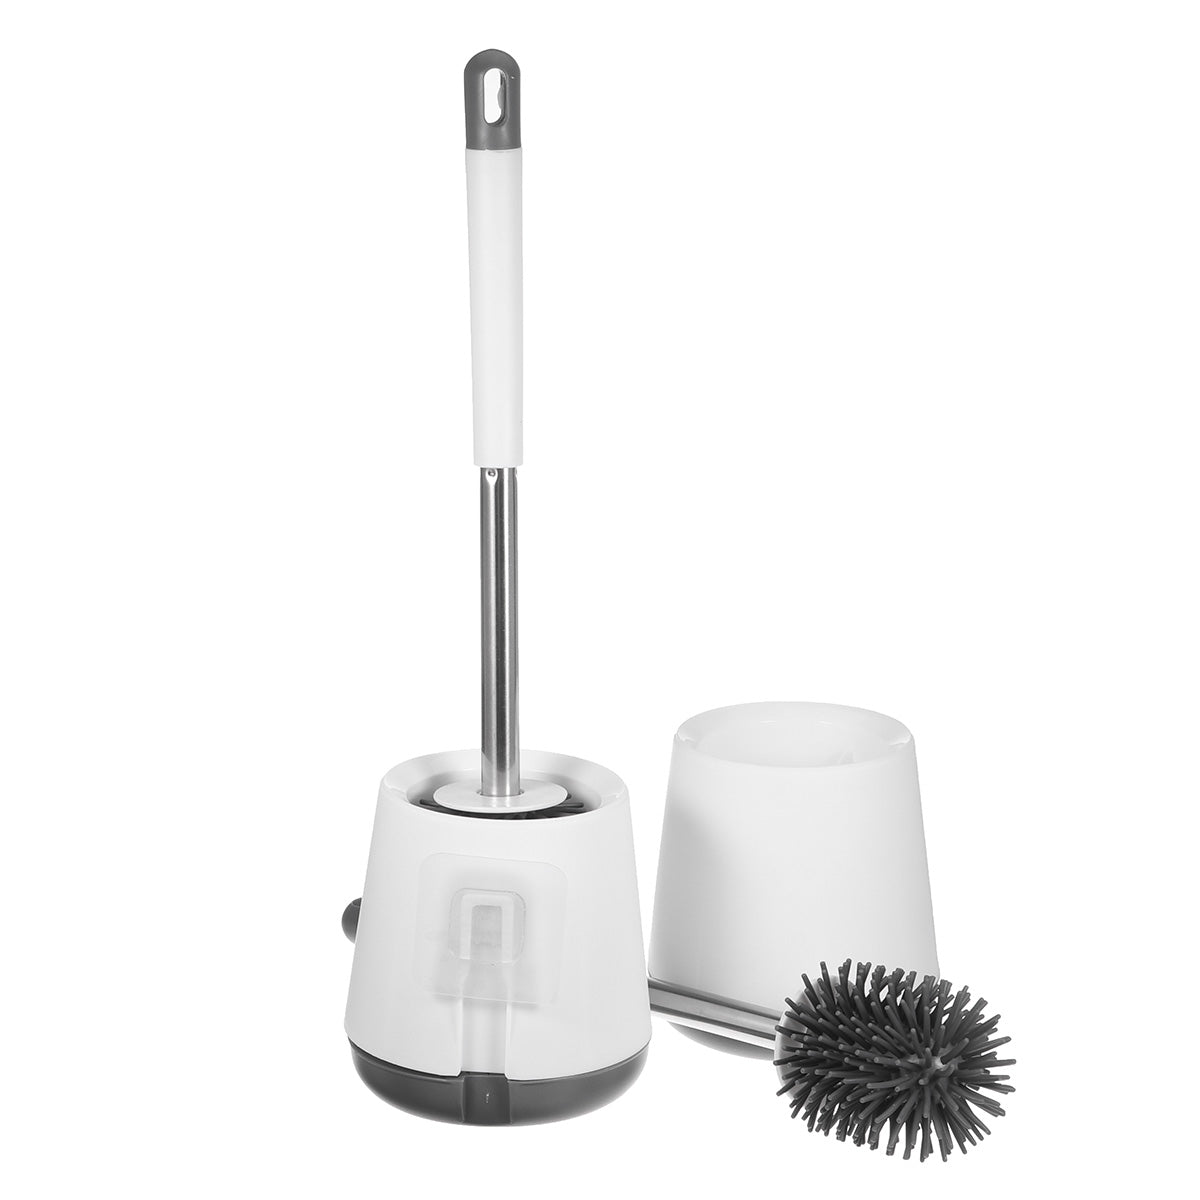 Toilet Brush Floor-standing Wall-mounted Base Cleaning Brush for Toilet Household Cleaning Tool Bathroom Accessories